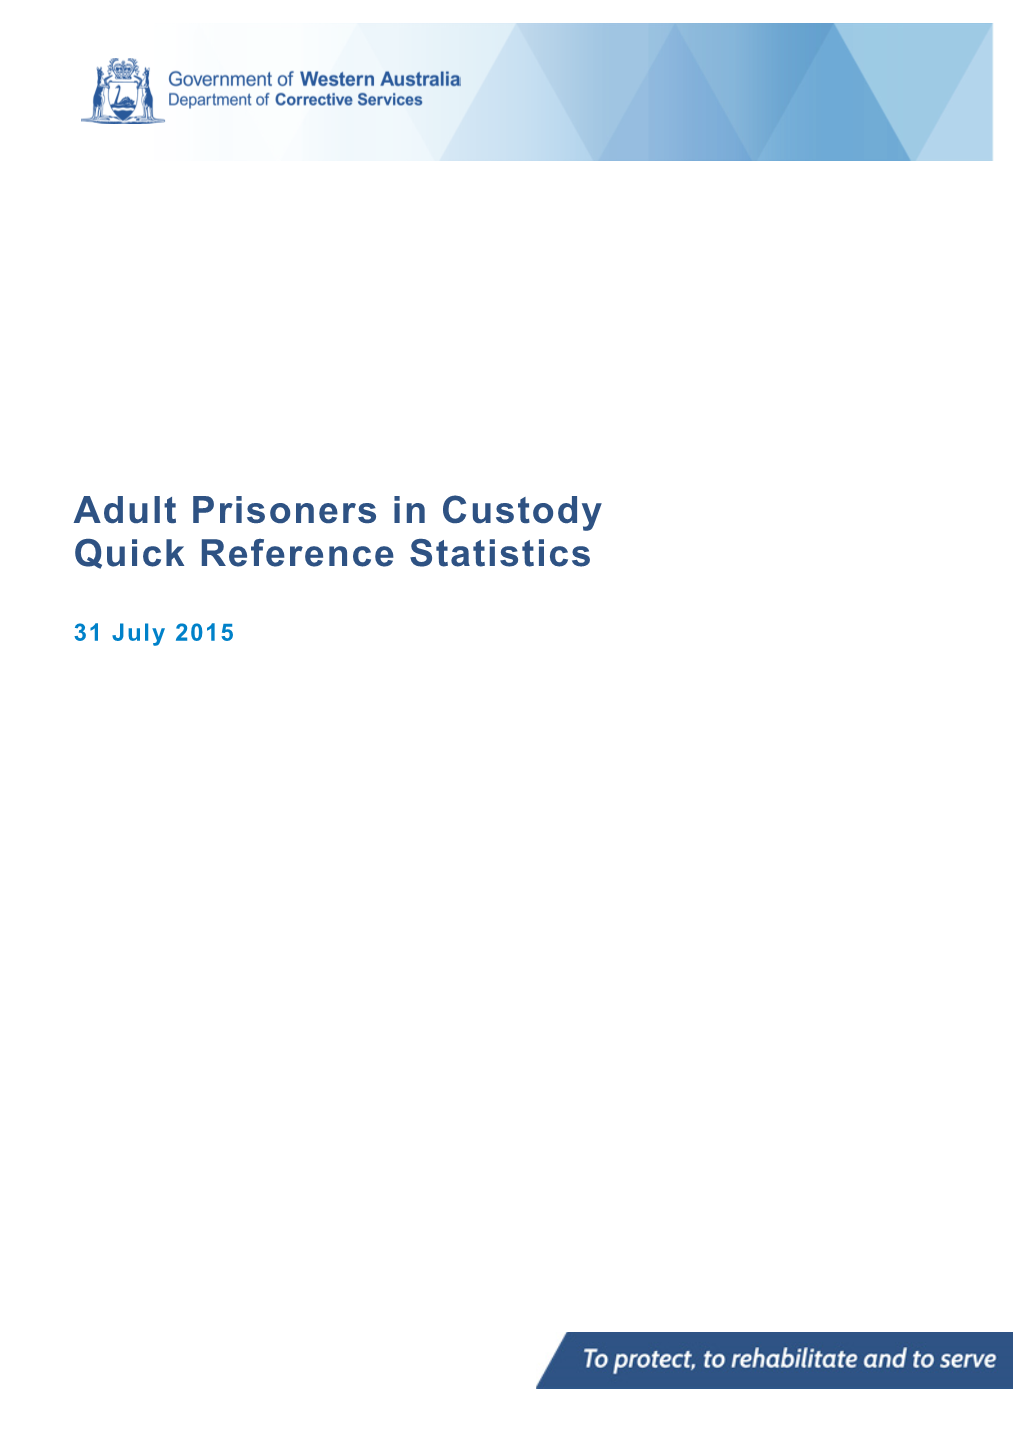 Adult Prisoners in Custody – Quick Reference Statistics – 31 July 2015